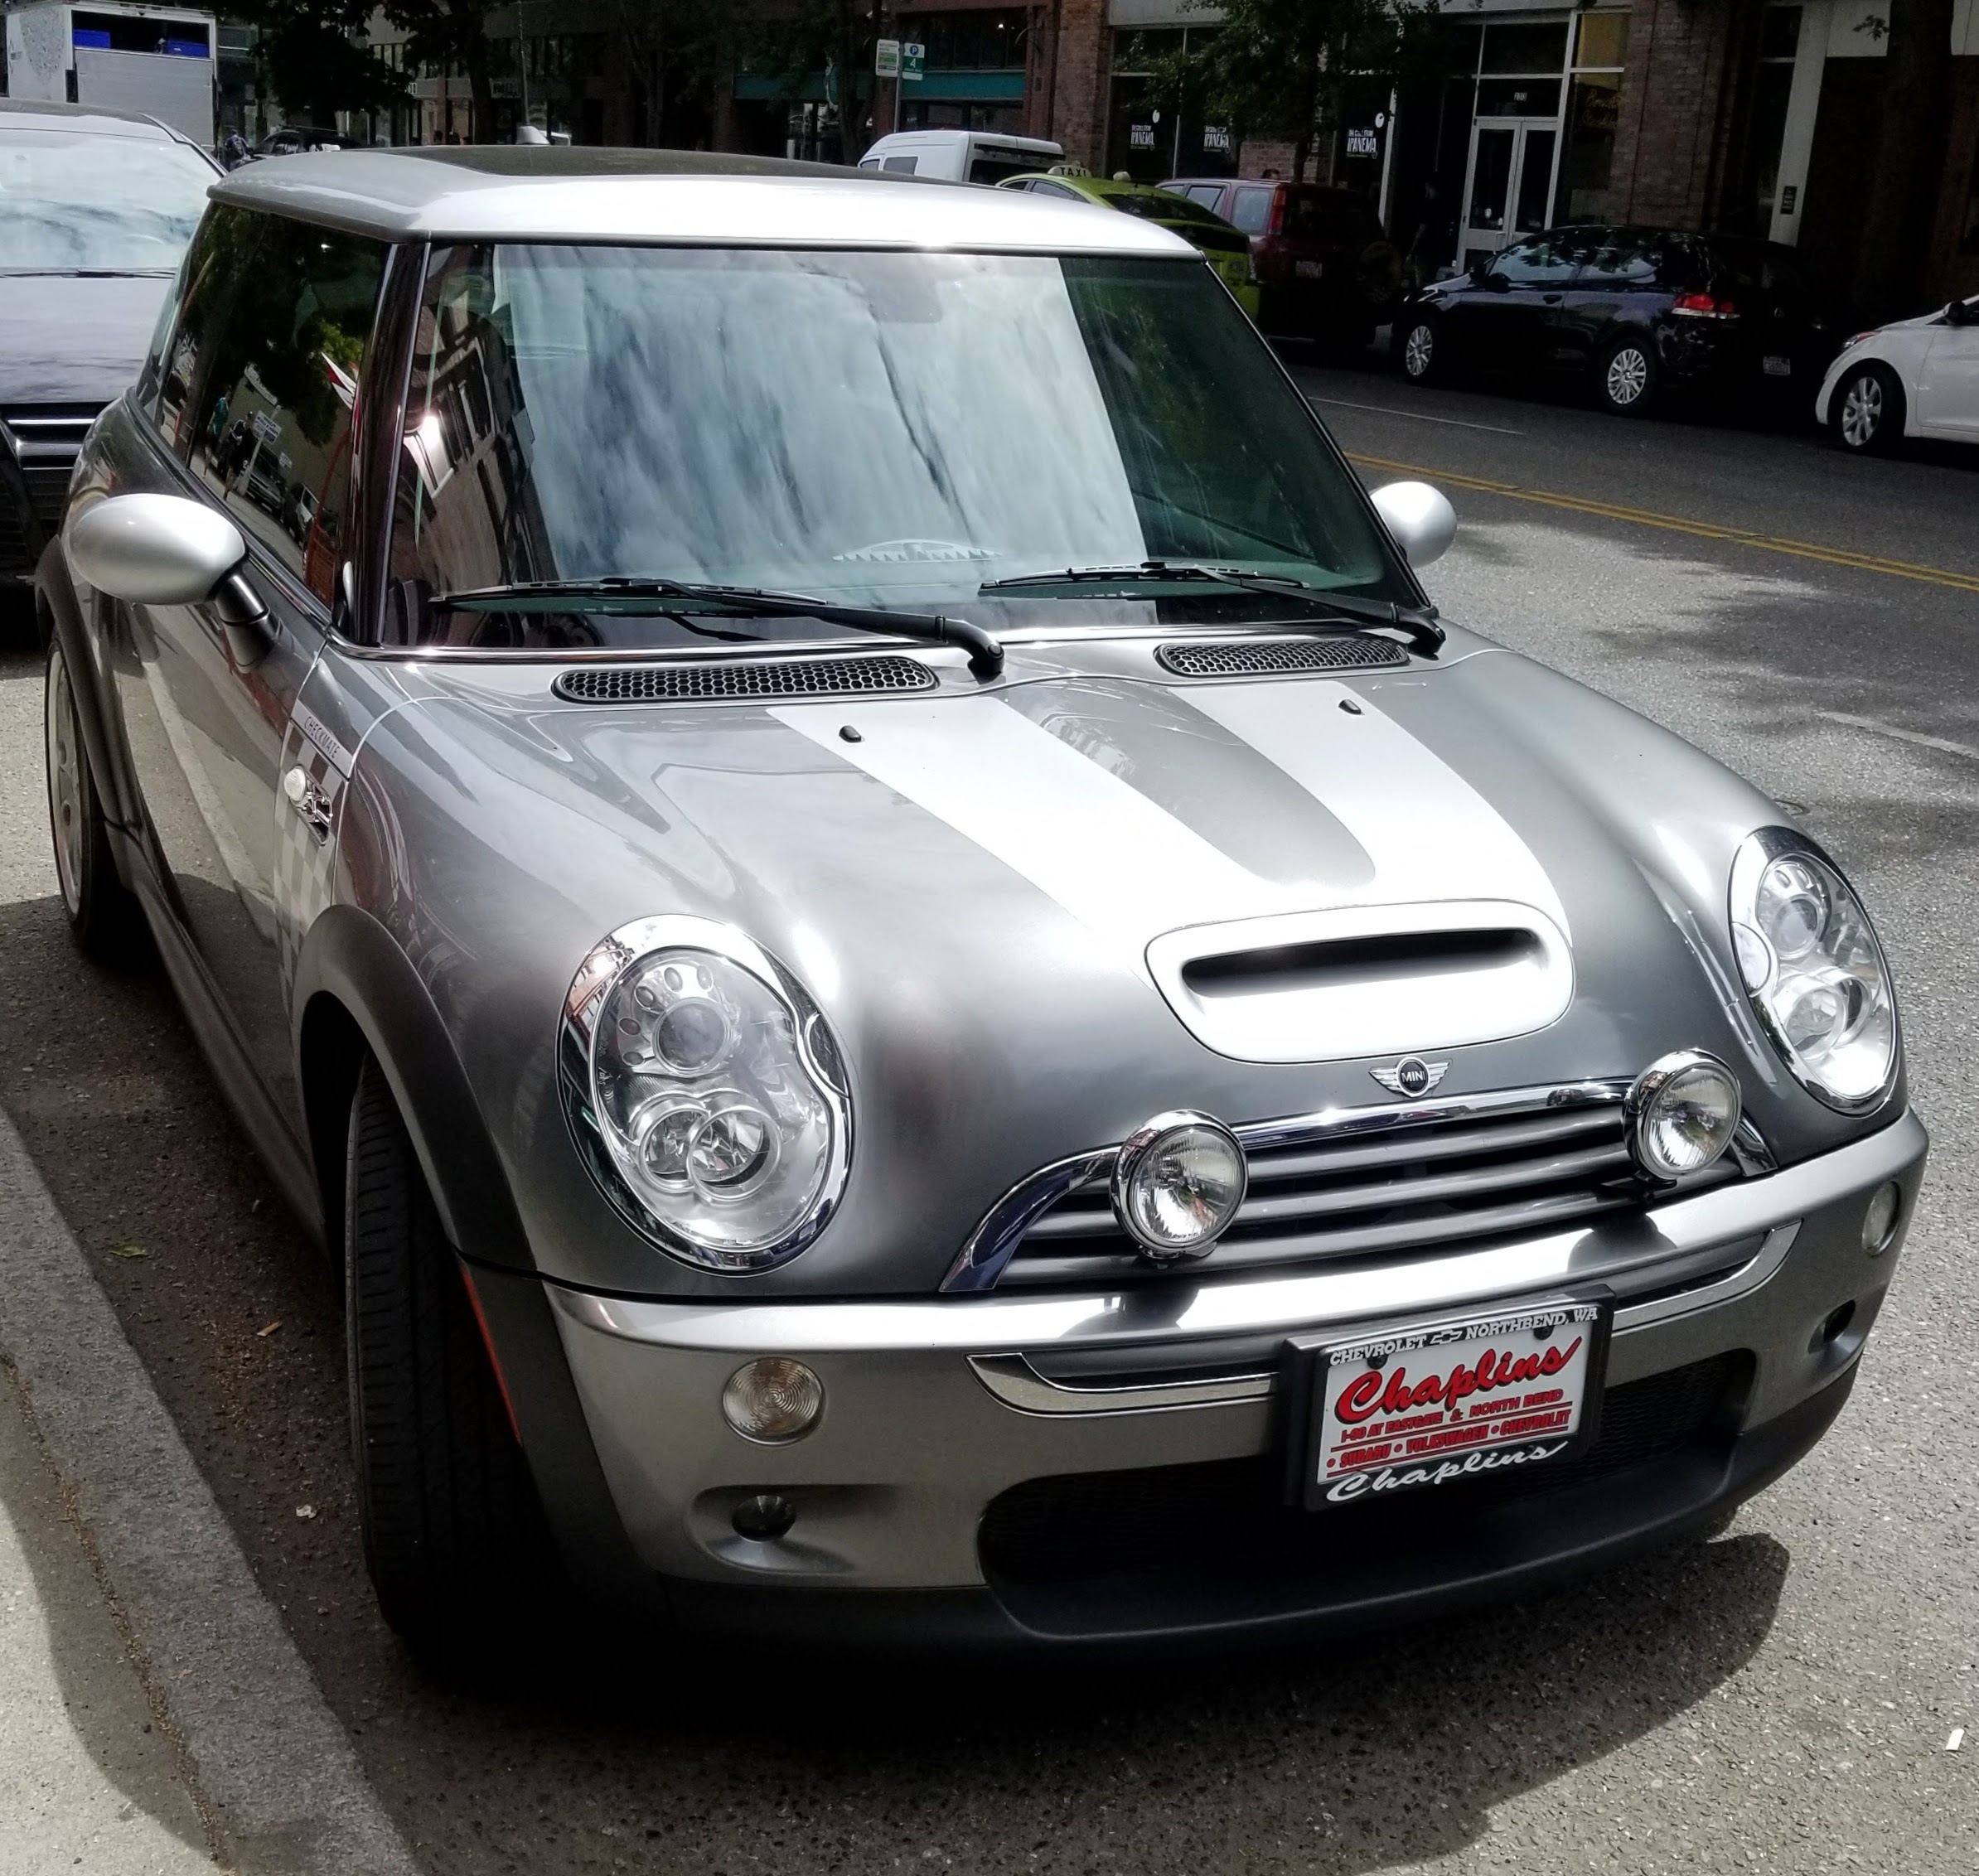 New to the forum - Mini Cooper Forums - Mini Cooper Enthusiast Forums